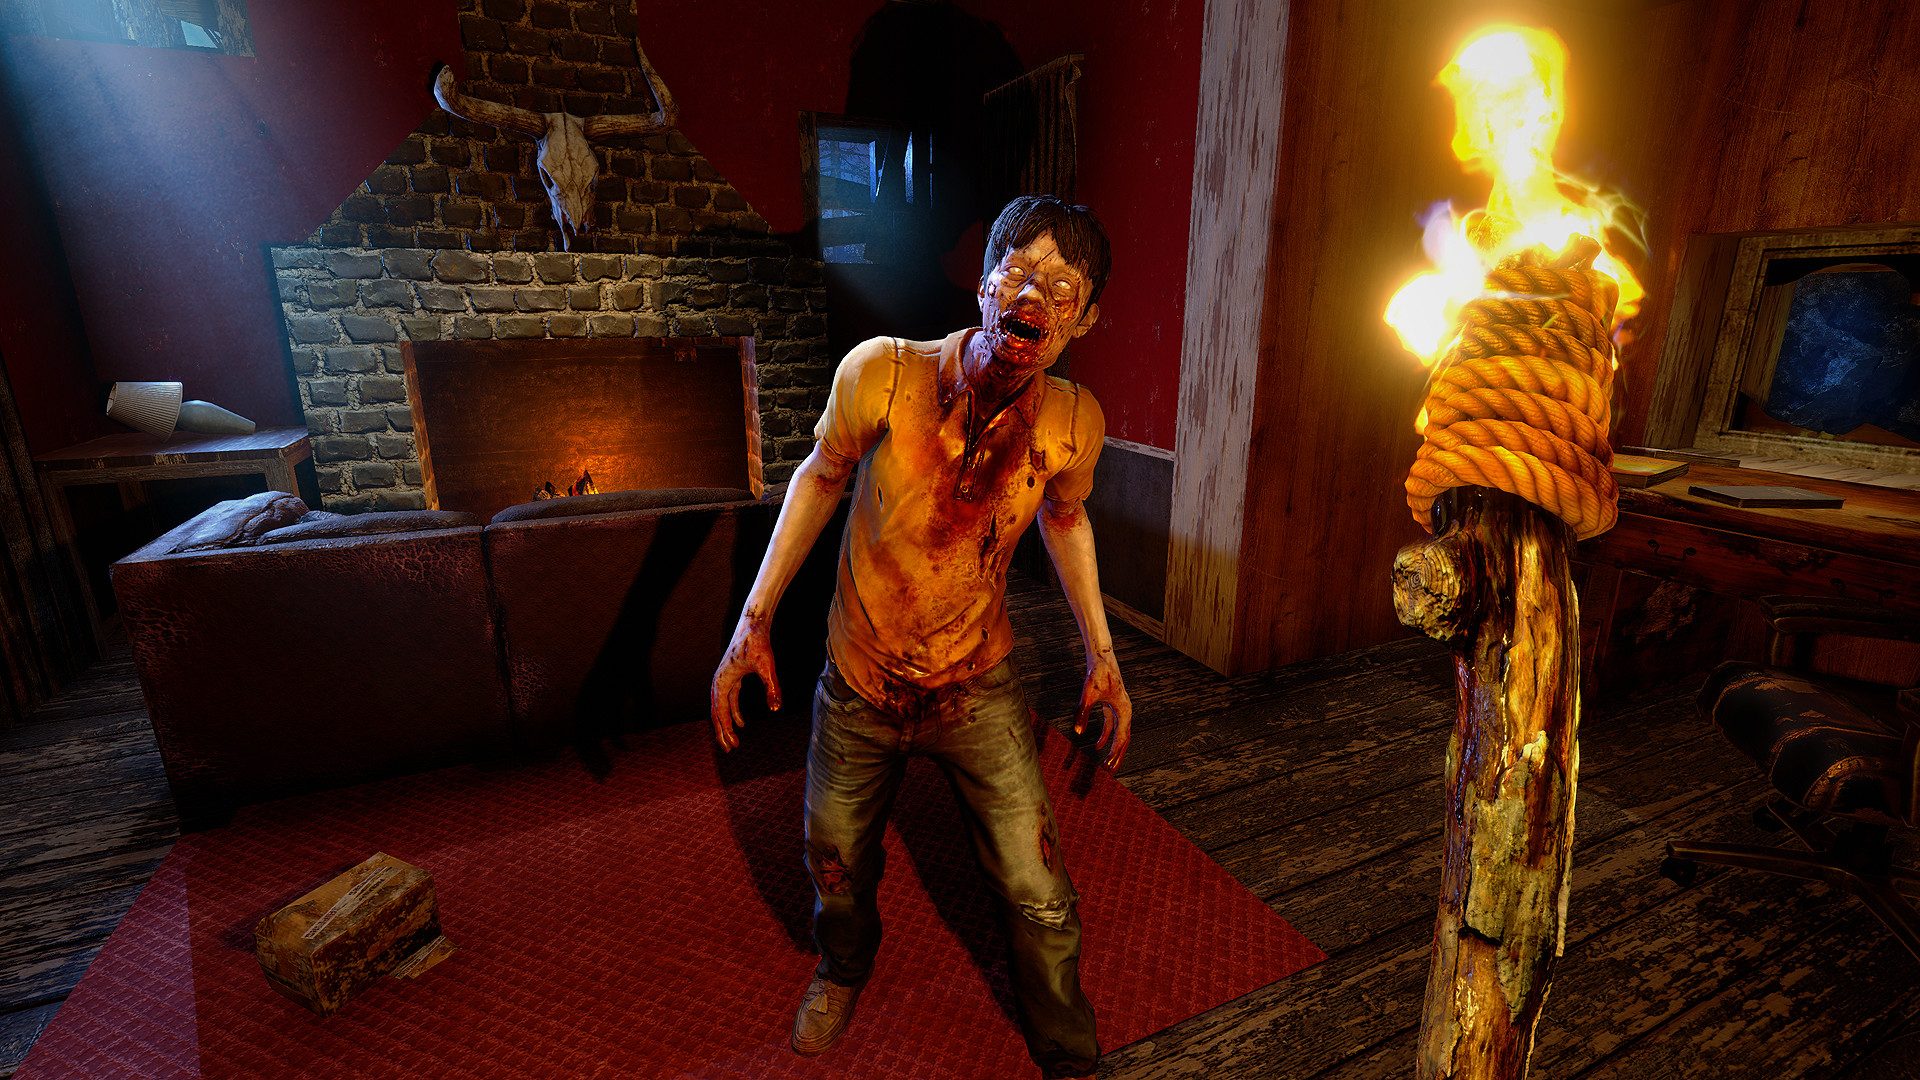 A screenshot from 7 Days to Die showing a zombie with the protagonist holding a flaming torch.